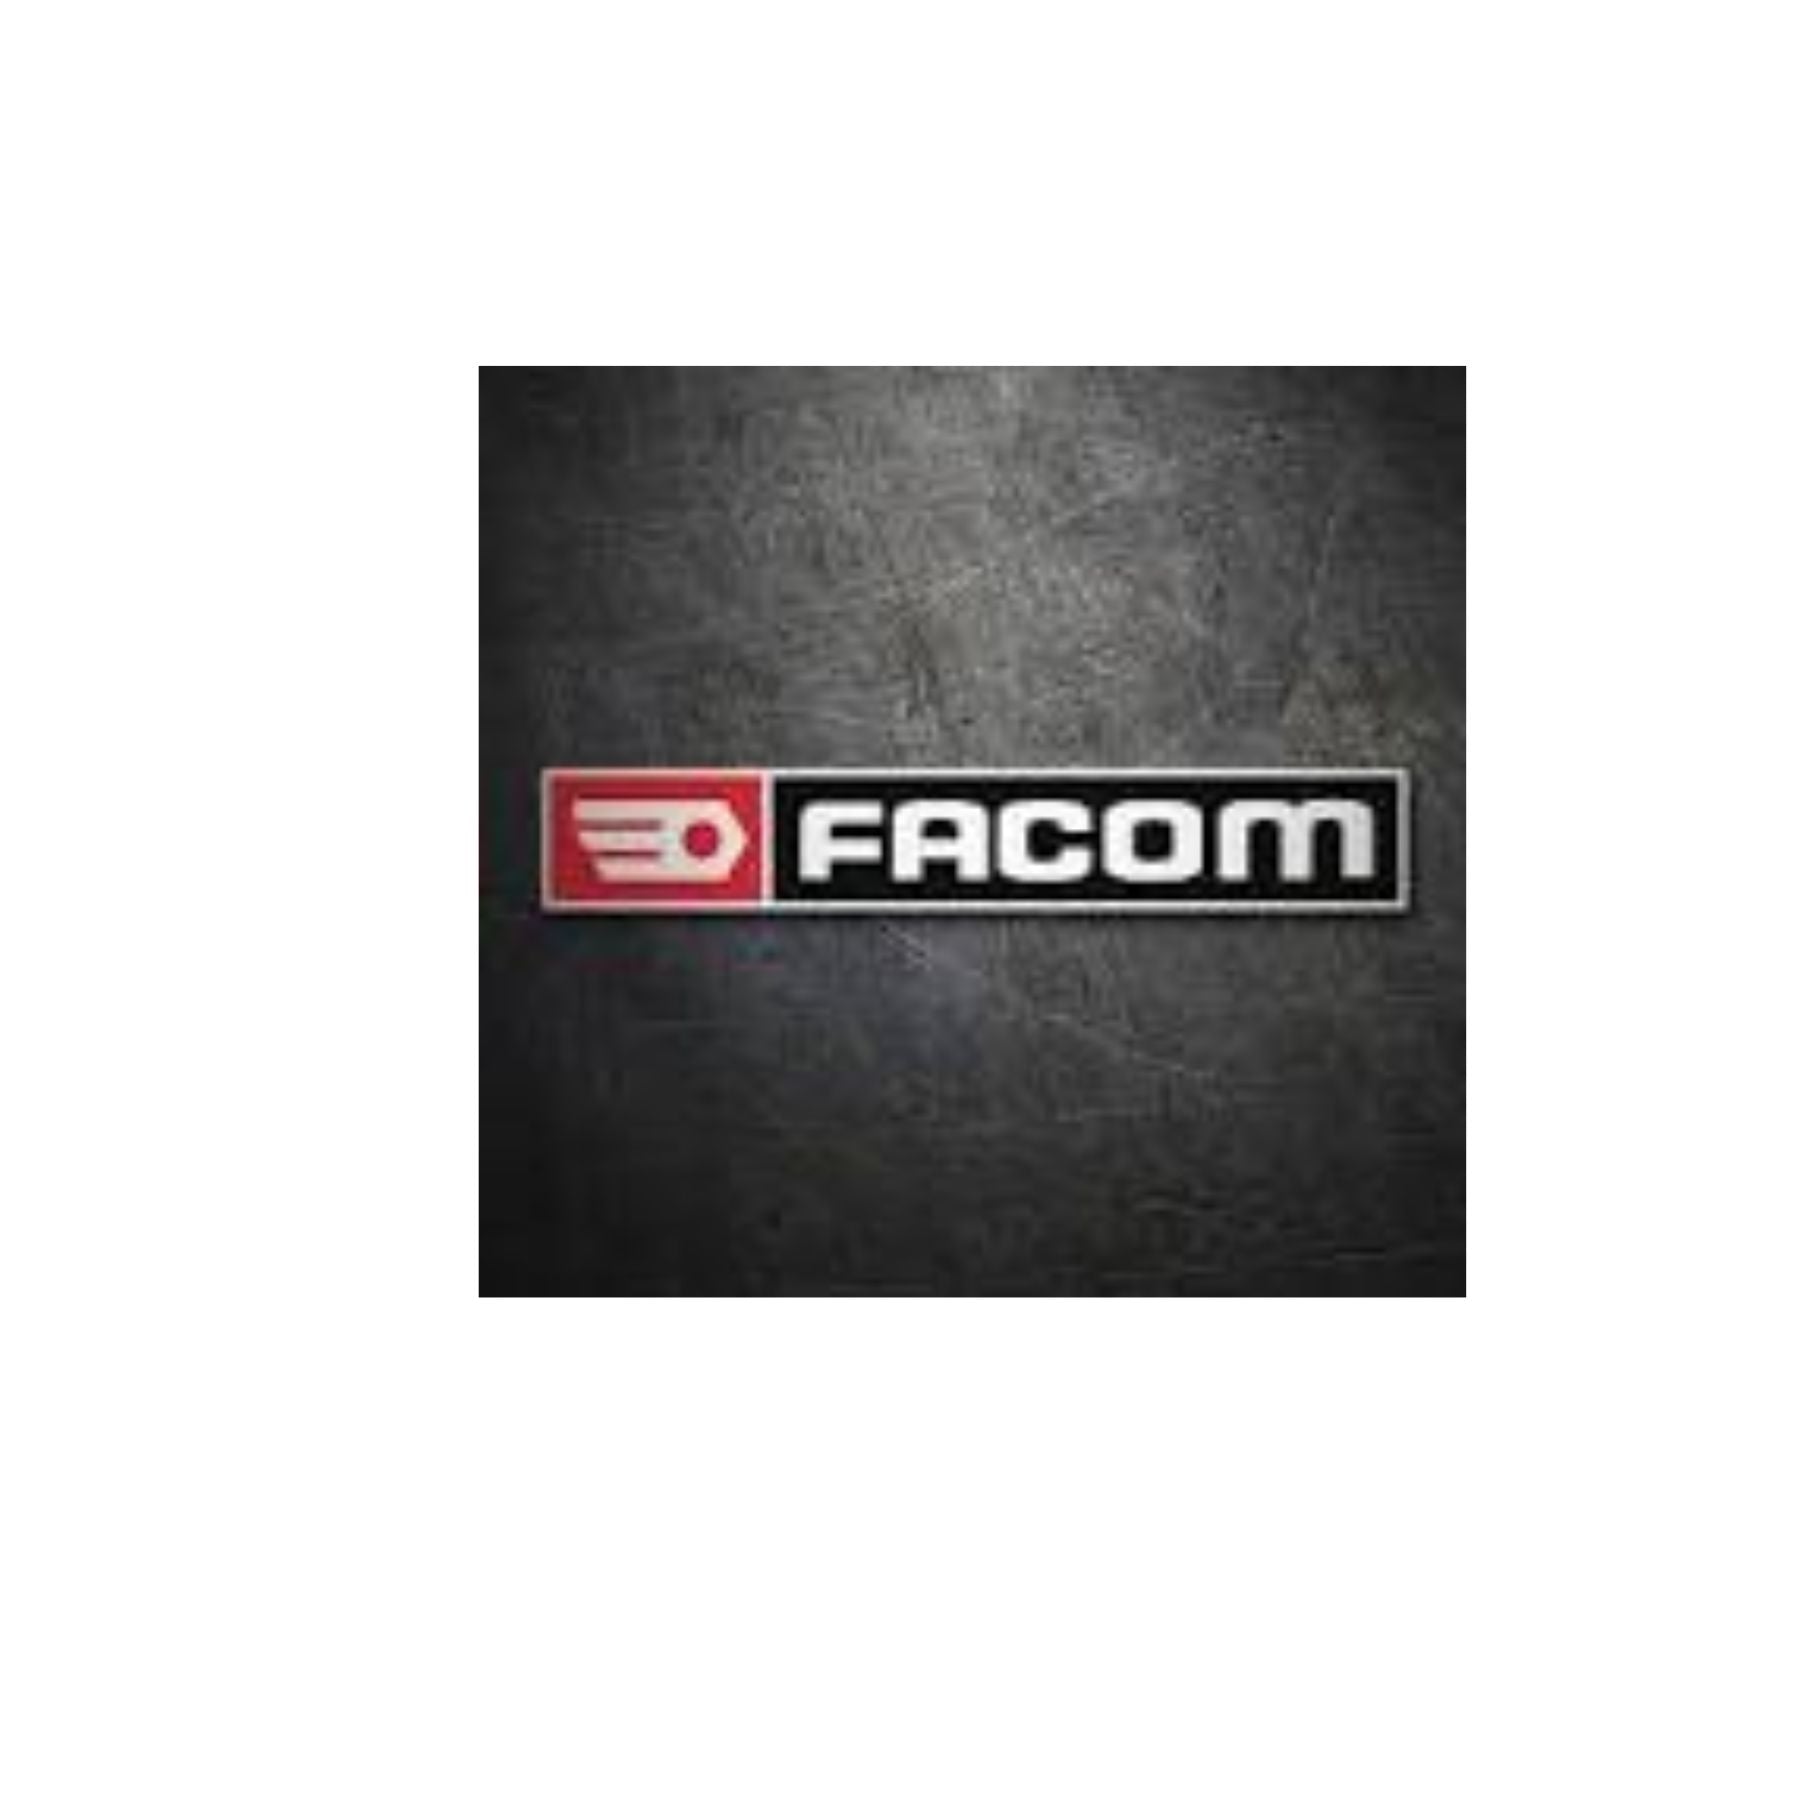 Facom E.306A135S Digital Electronic Torque wrenches with Ratchet, Capacity 6.7-135, Square 1/2